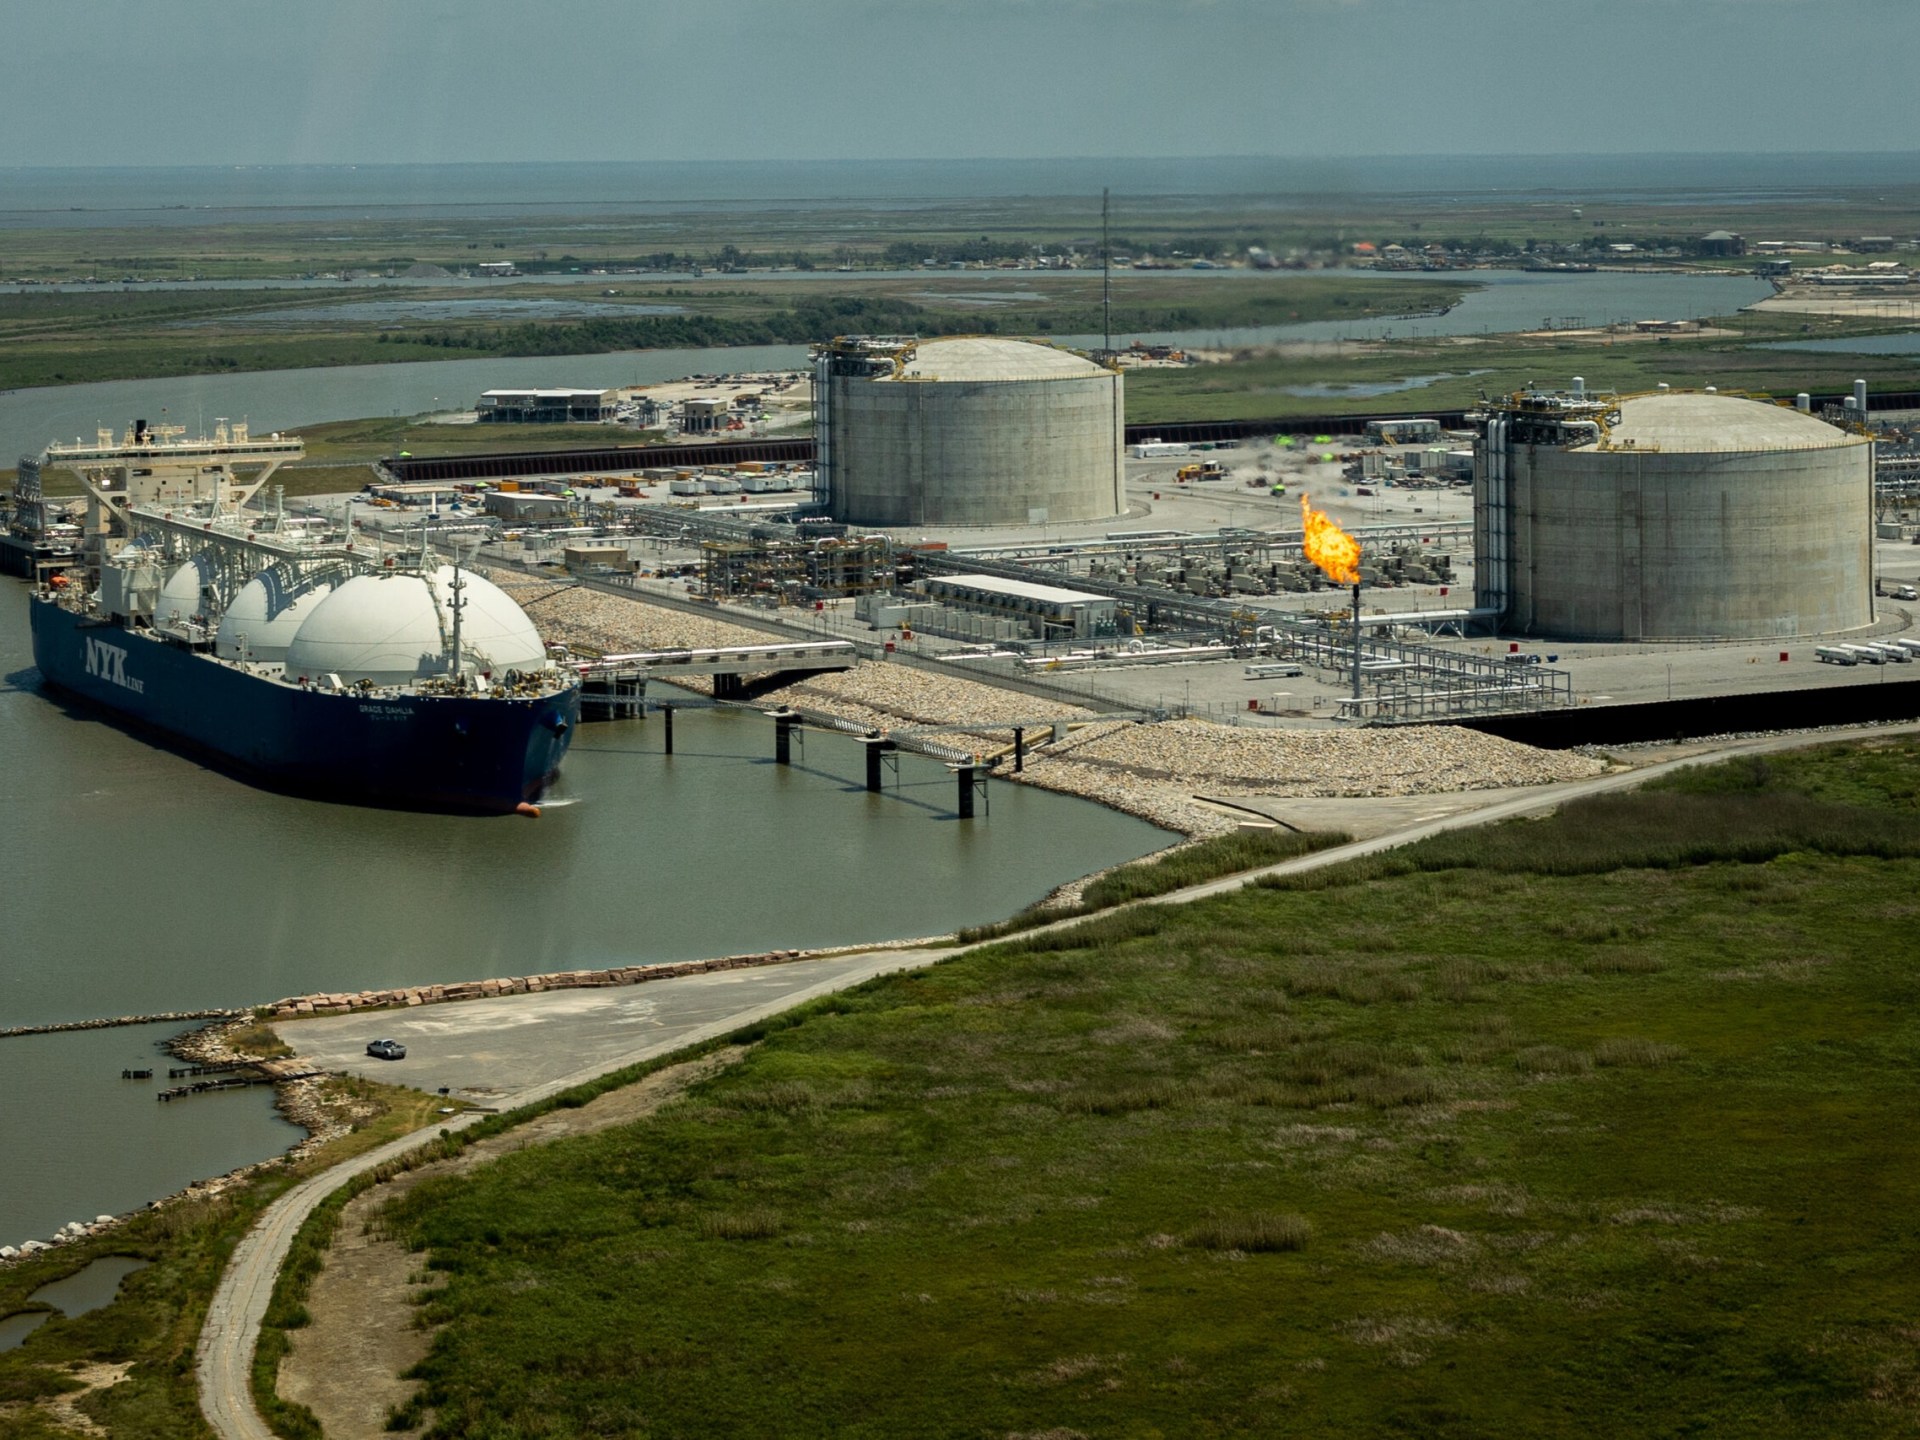 Communities on US LNG front line ask Biden to reject export terminal | Business and Economy #Communities #LNG #front #line #Biden #reject #export #terminal #Business #Economy